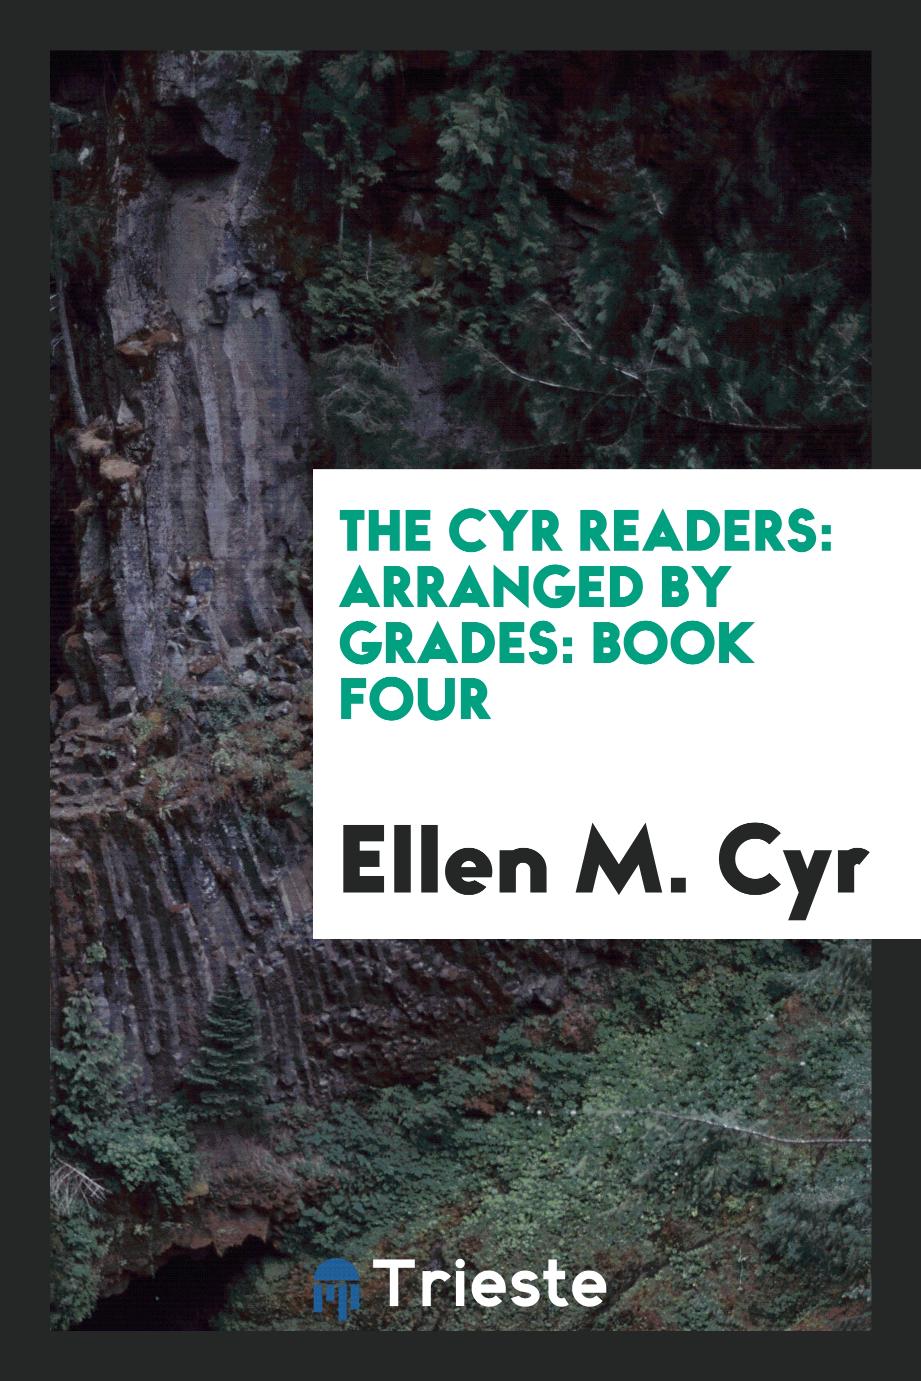 The Cyr Readers: Arranged by Grades: Book Four